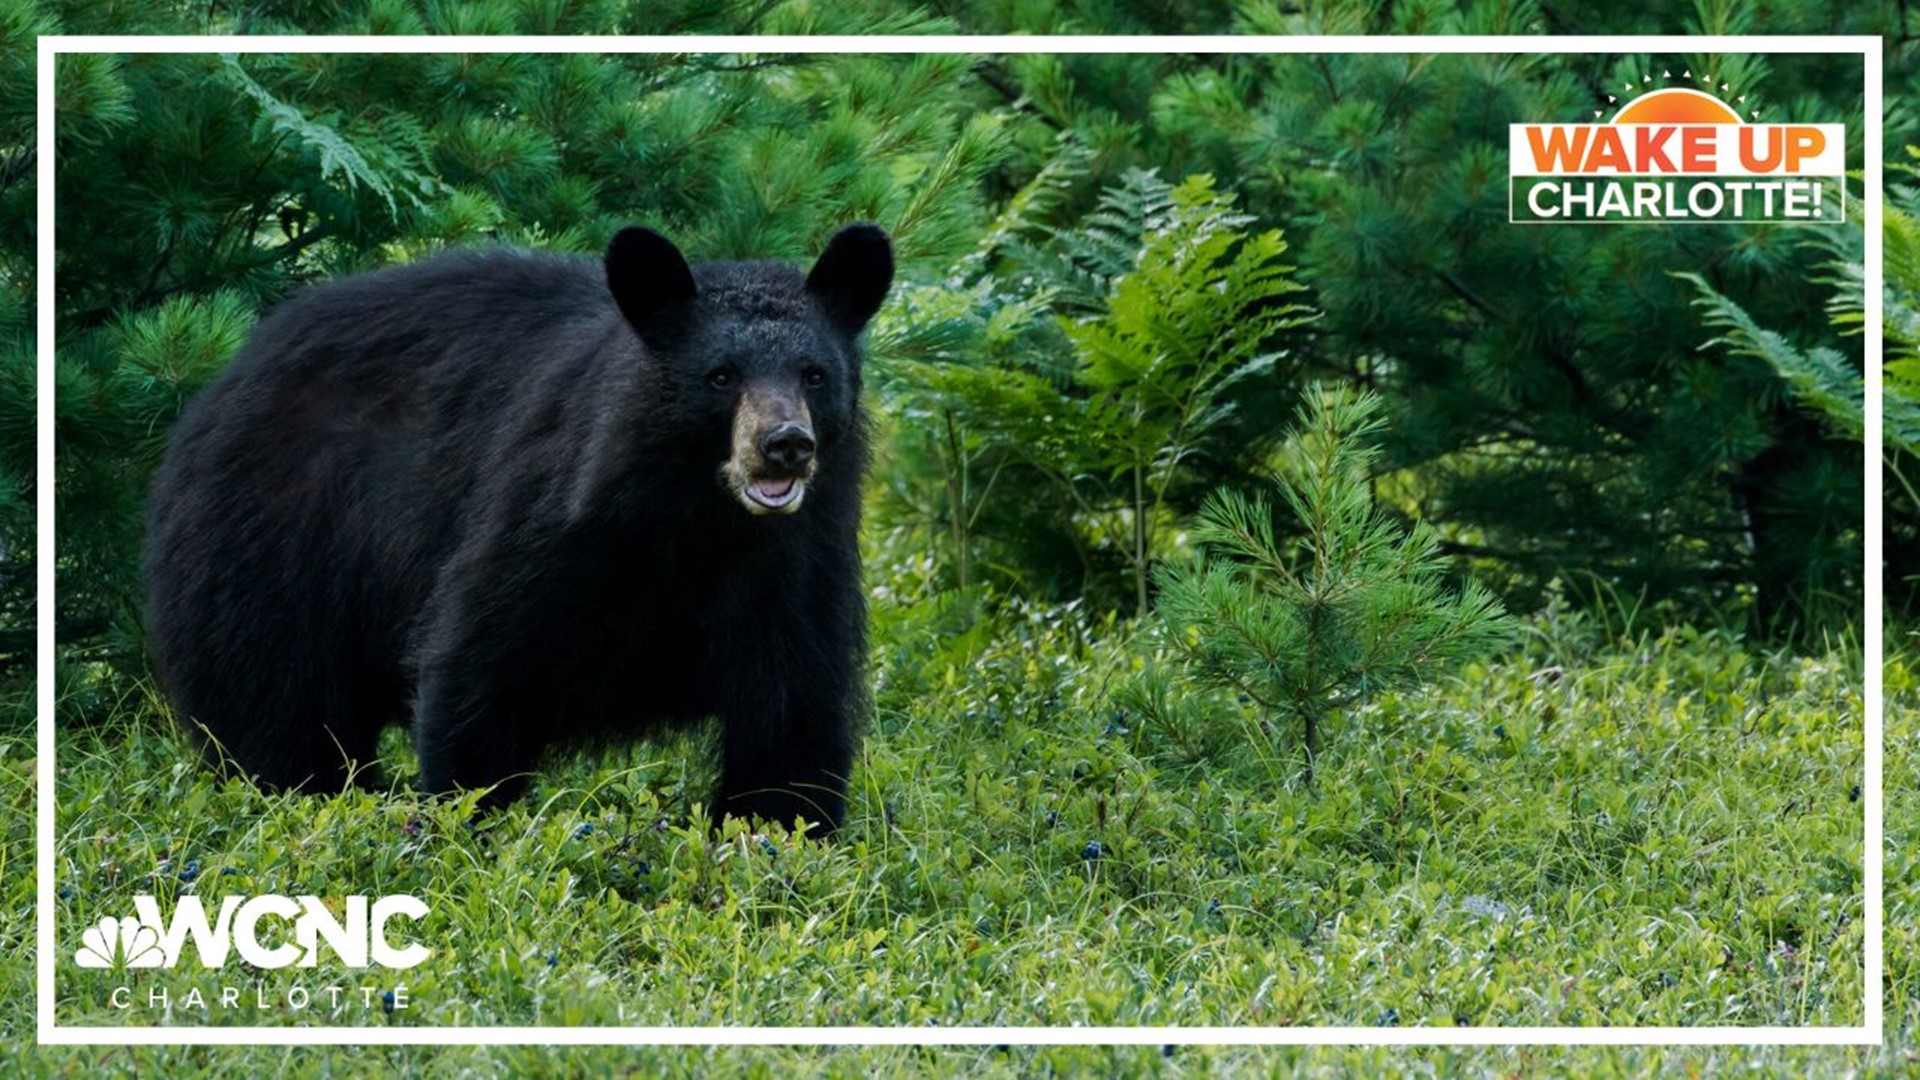 A section of the Blue Ridge Parkway near Asheville is temporarily closed after officials said people were trying to interact with bears.